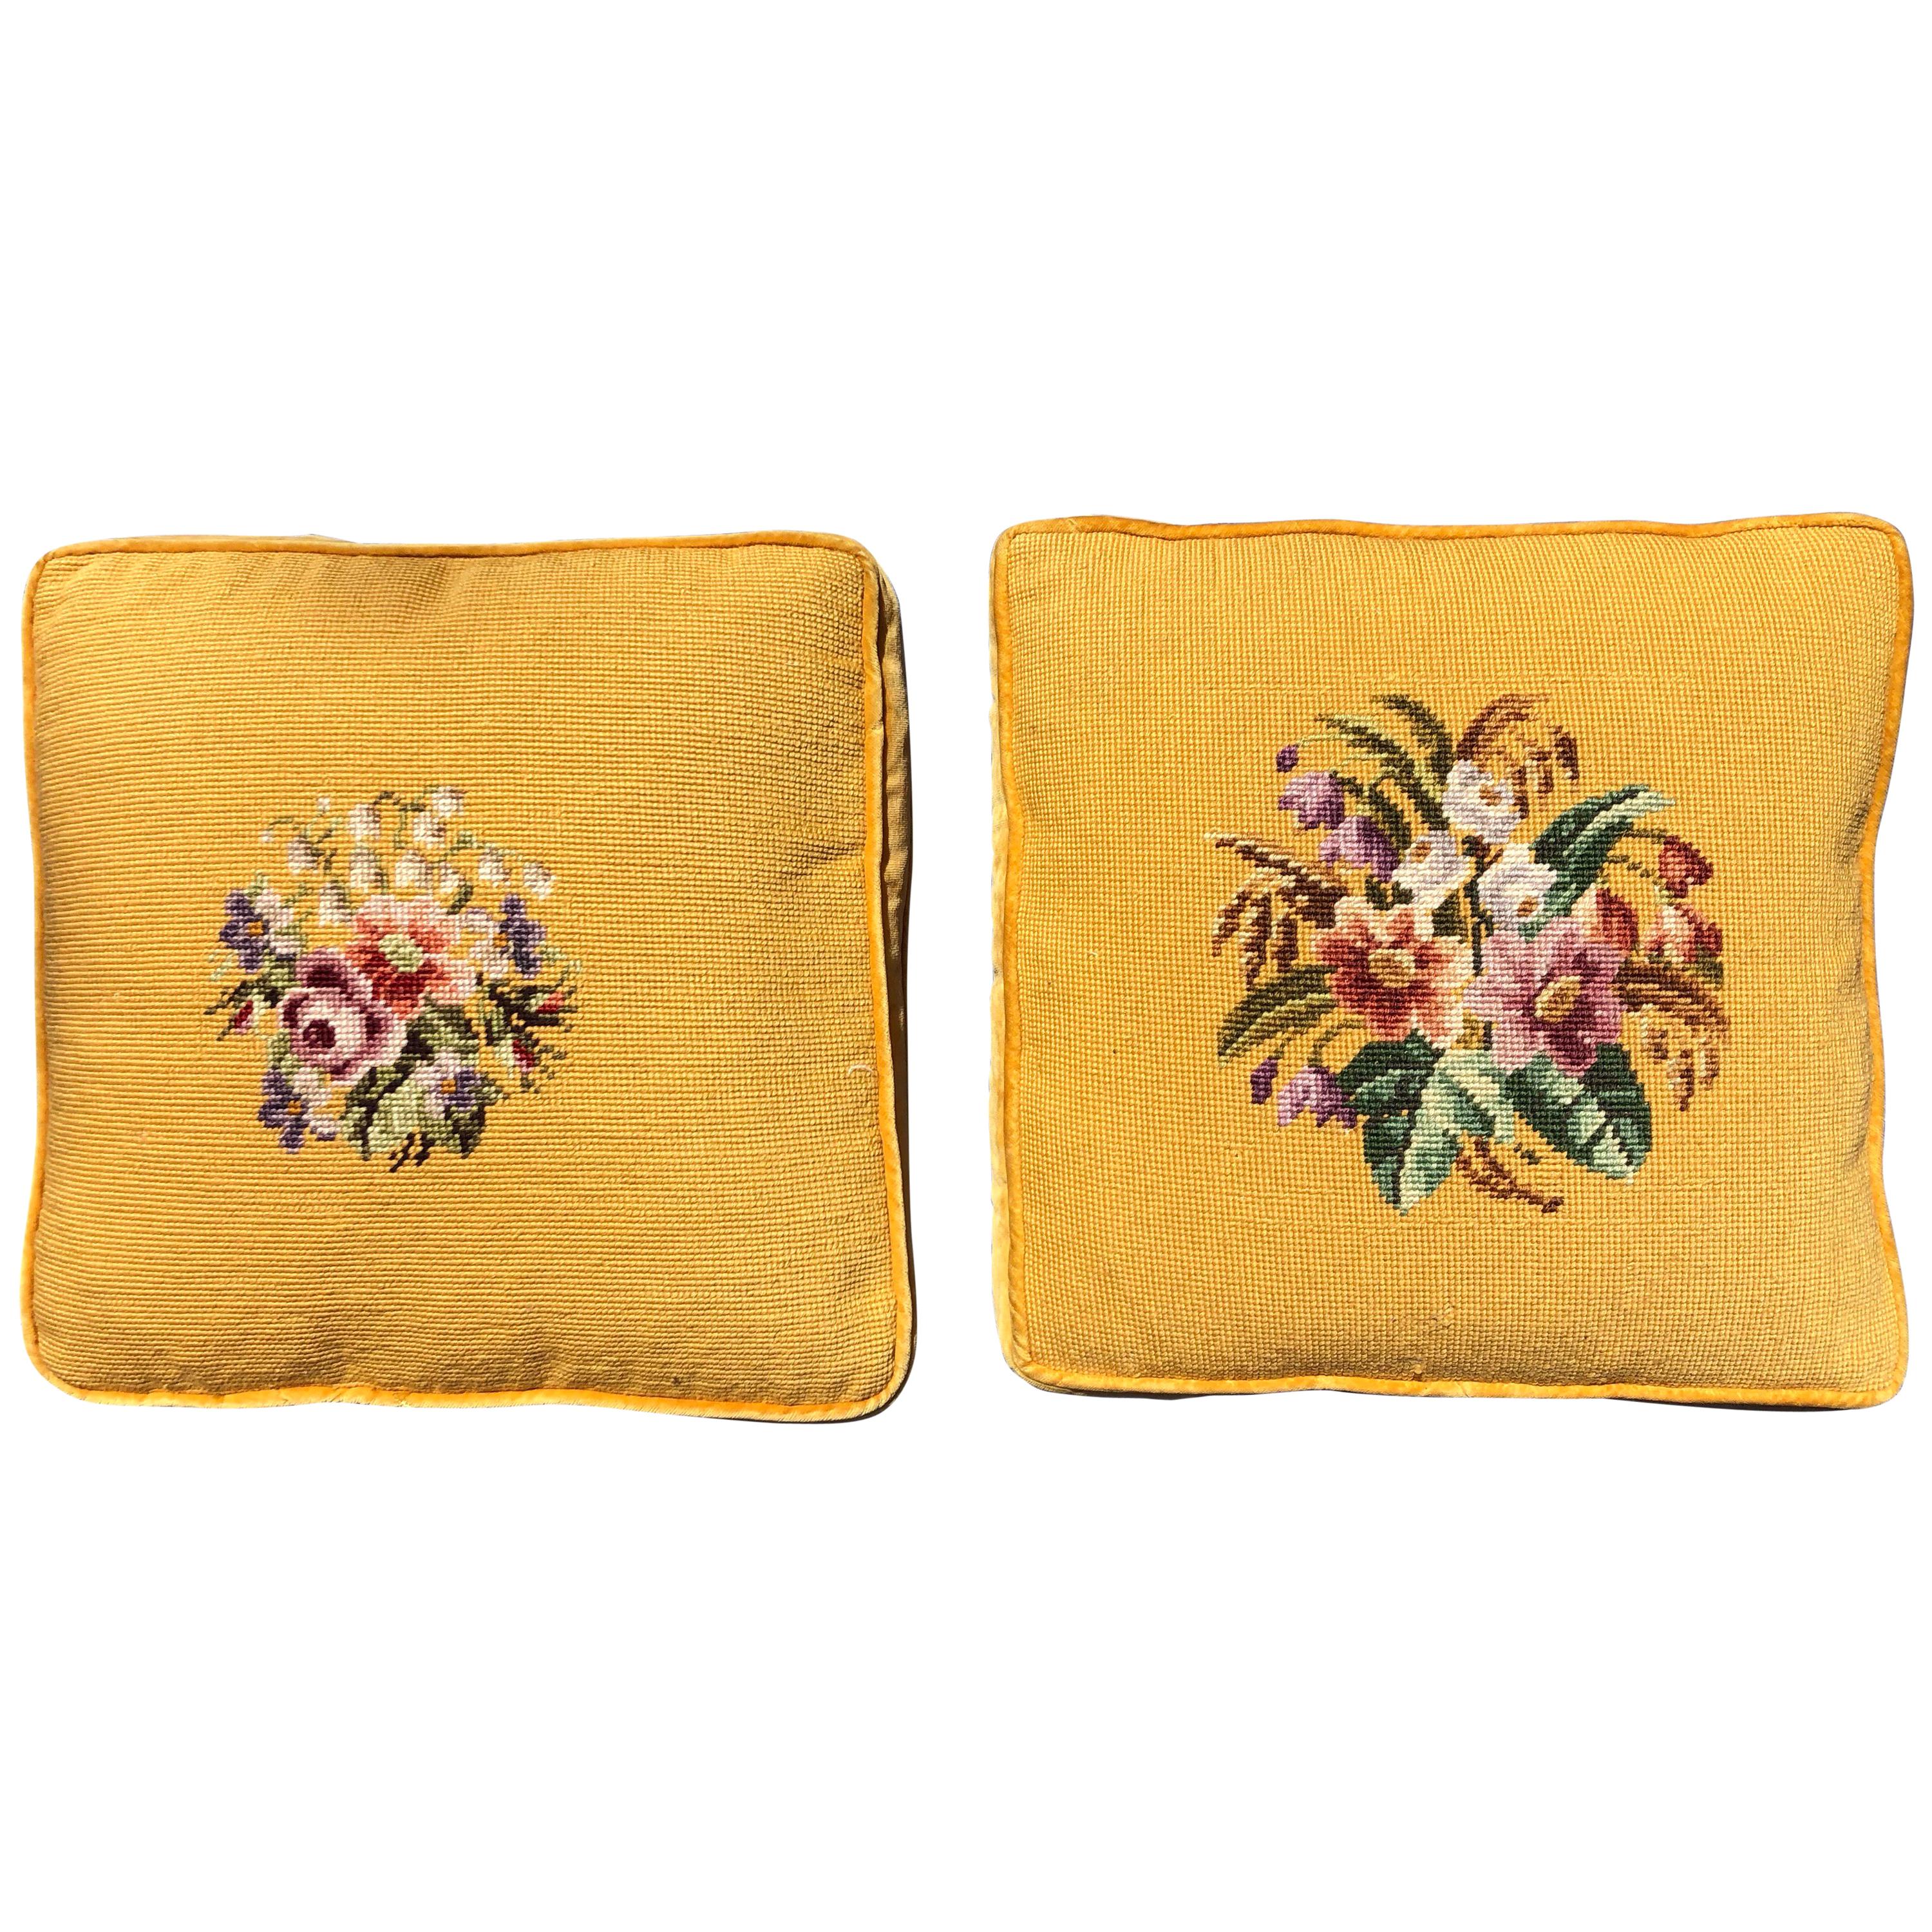 Pair of Yellow Needlepoint Embroidered Throw Pillows with Floral Motif For Sale